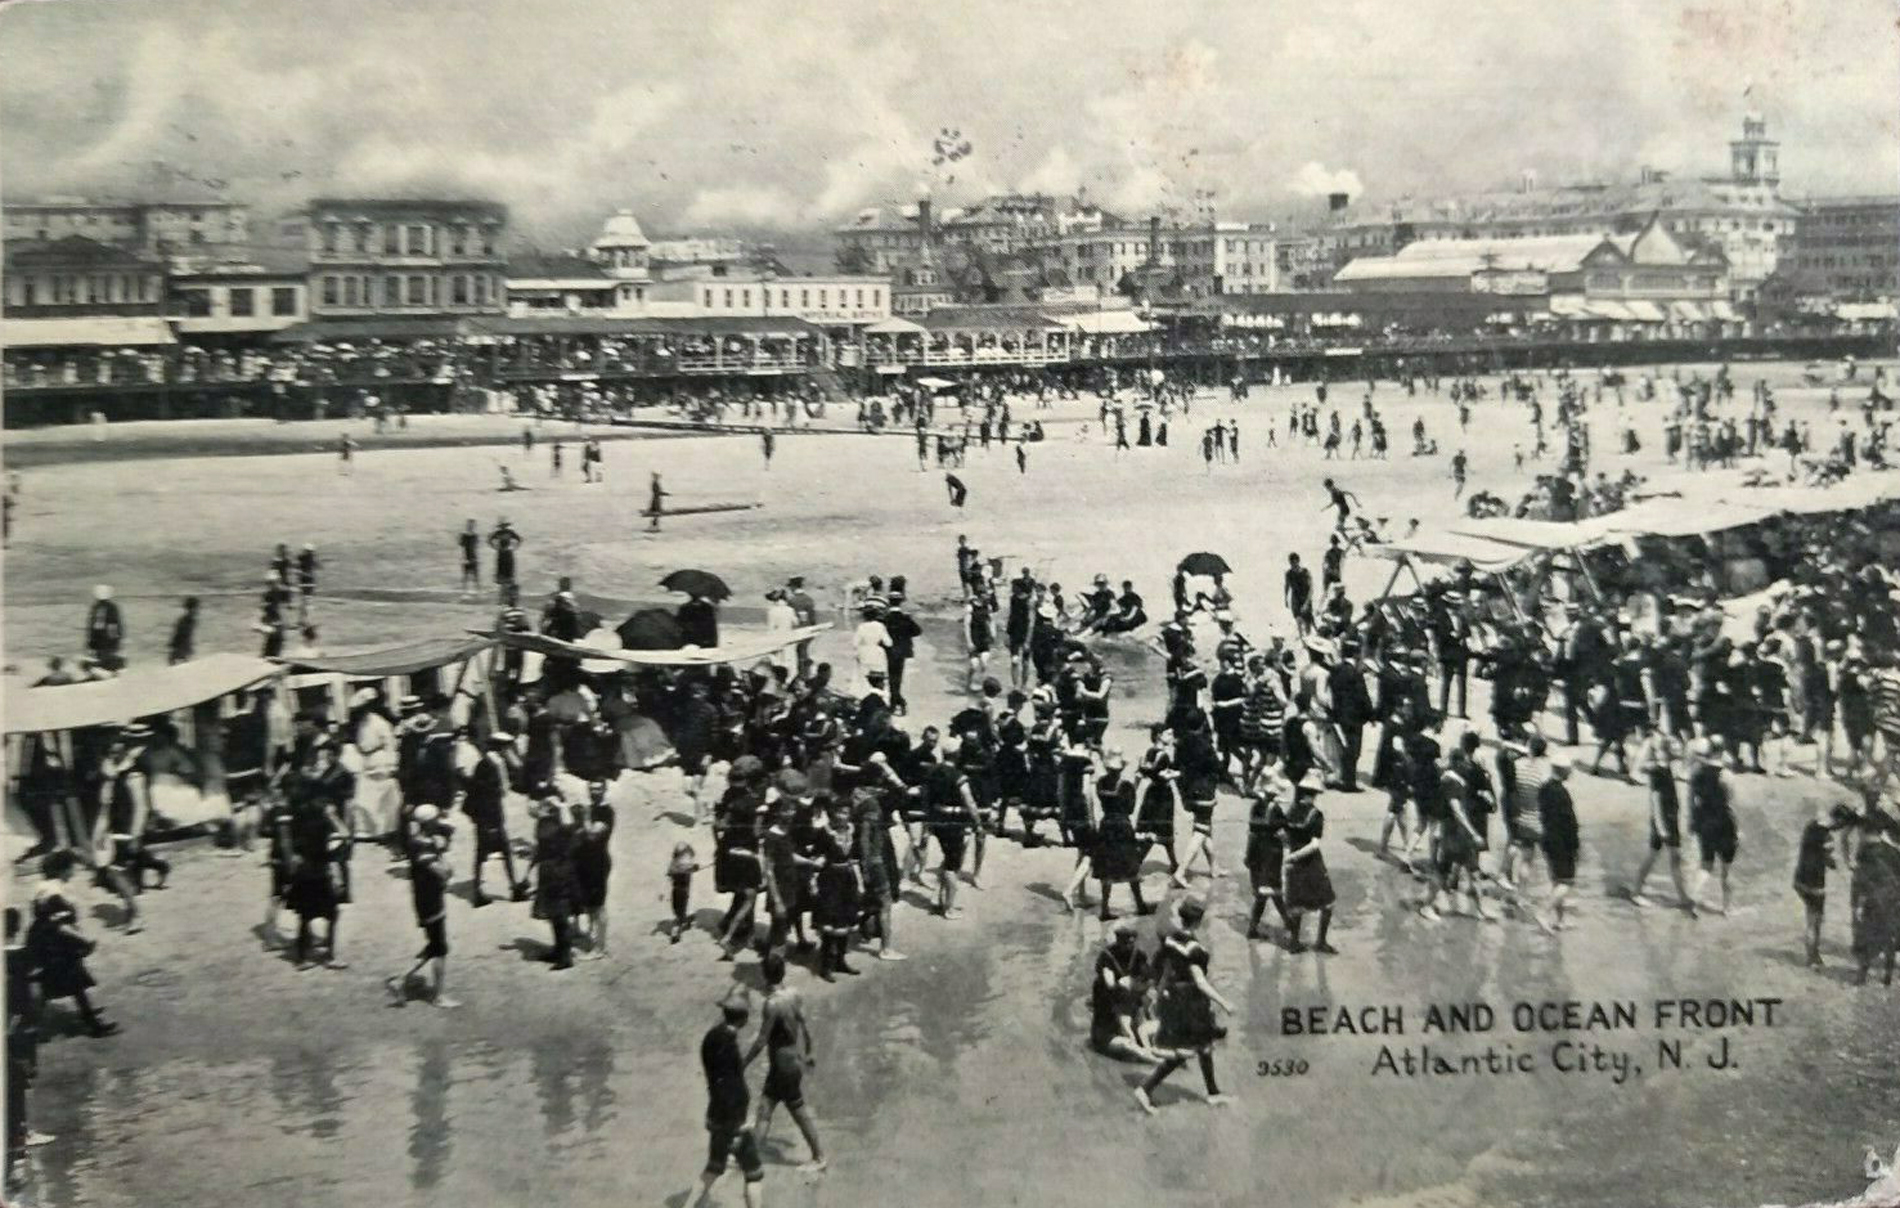 Atlantic City - An epic view of the beach bathers and boardwalk - c 1910